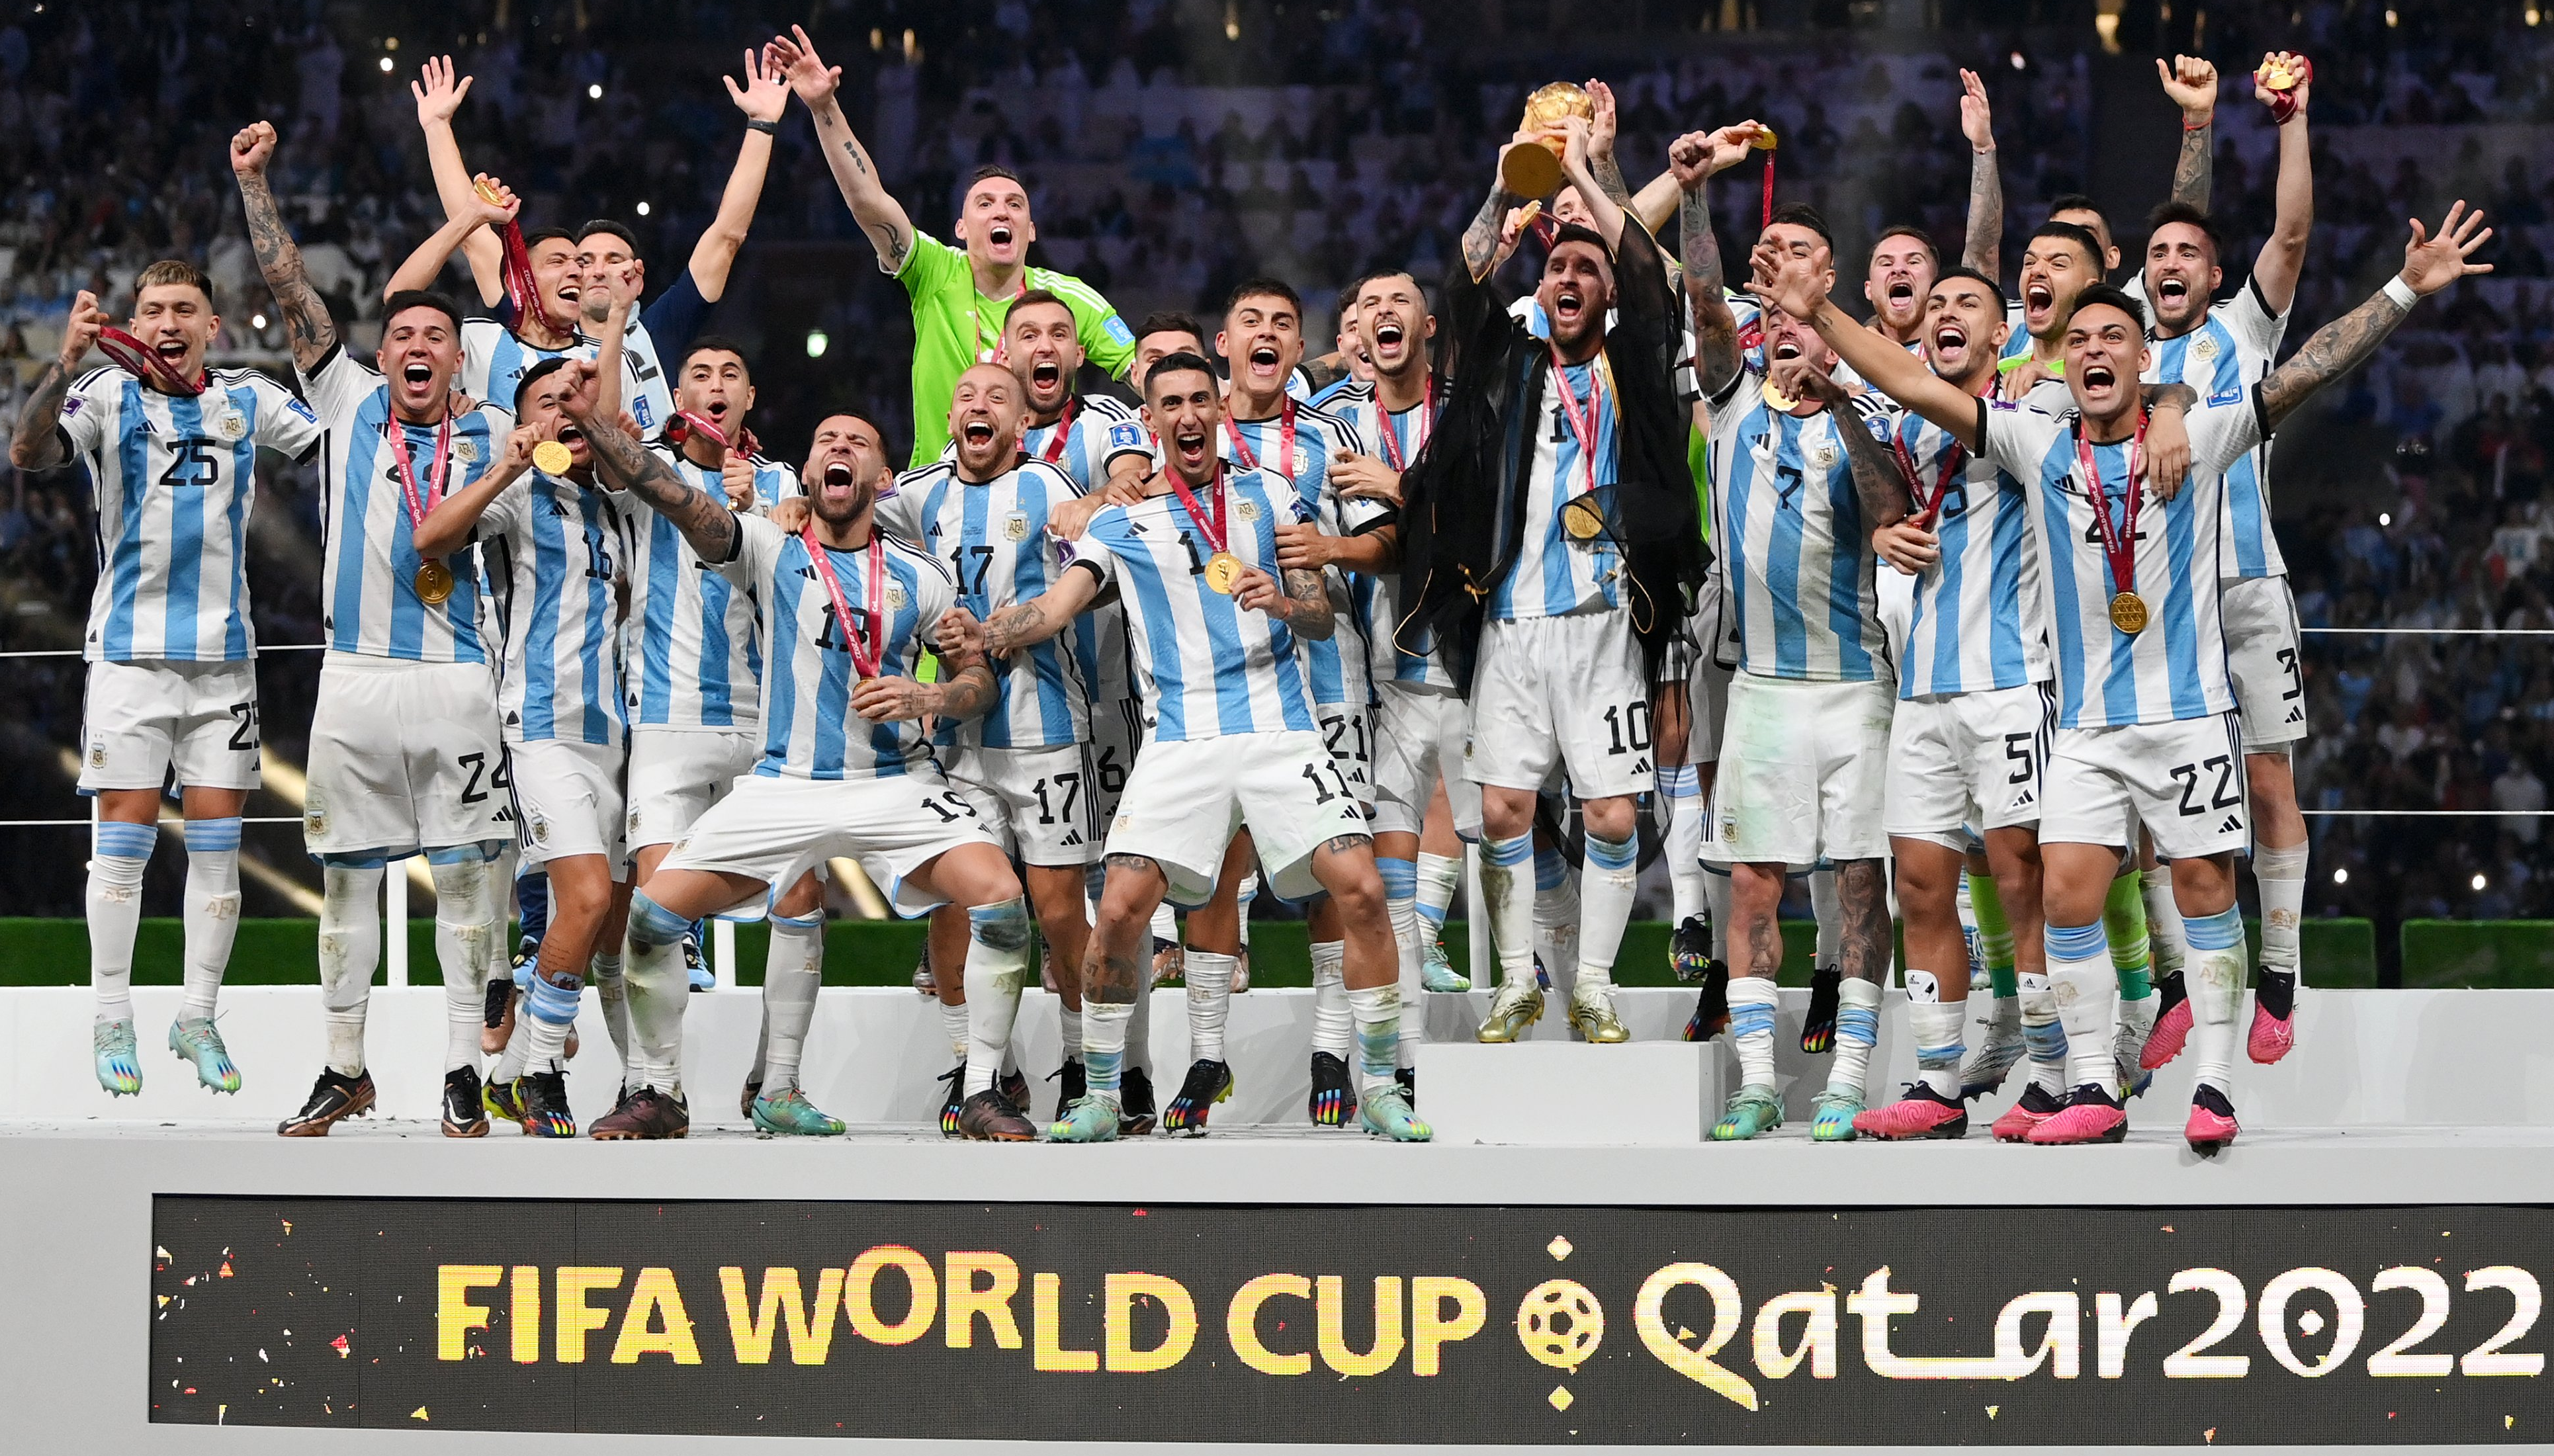 Argentina, World Cup 2022, World Cup